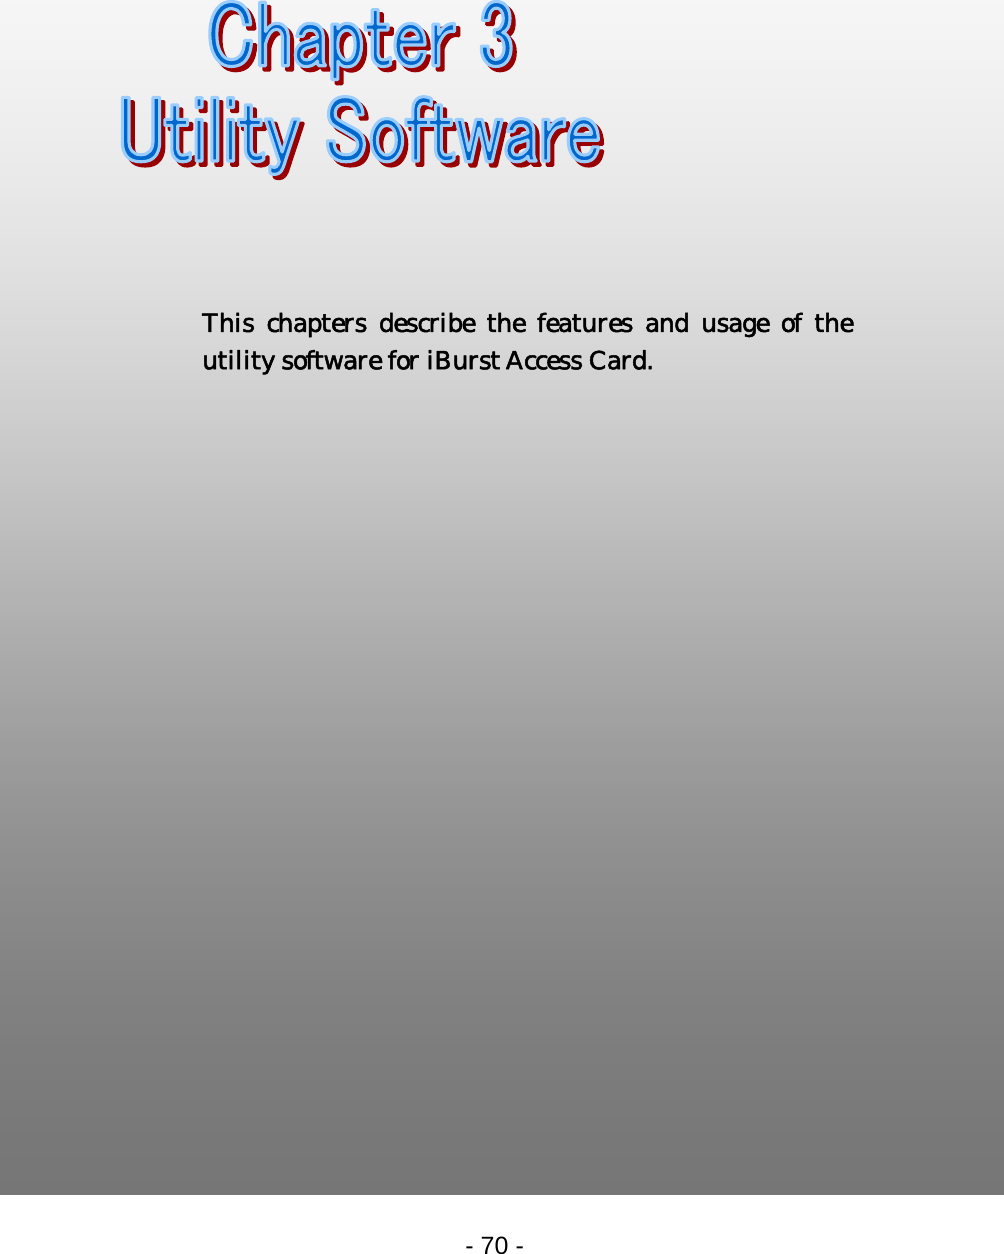      Chapter 3 Utility Software                                 This chapters describe the features and usage of the utility software for iBurst Access Card. - 70 -  